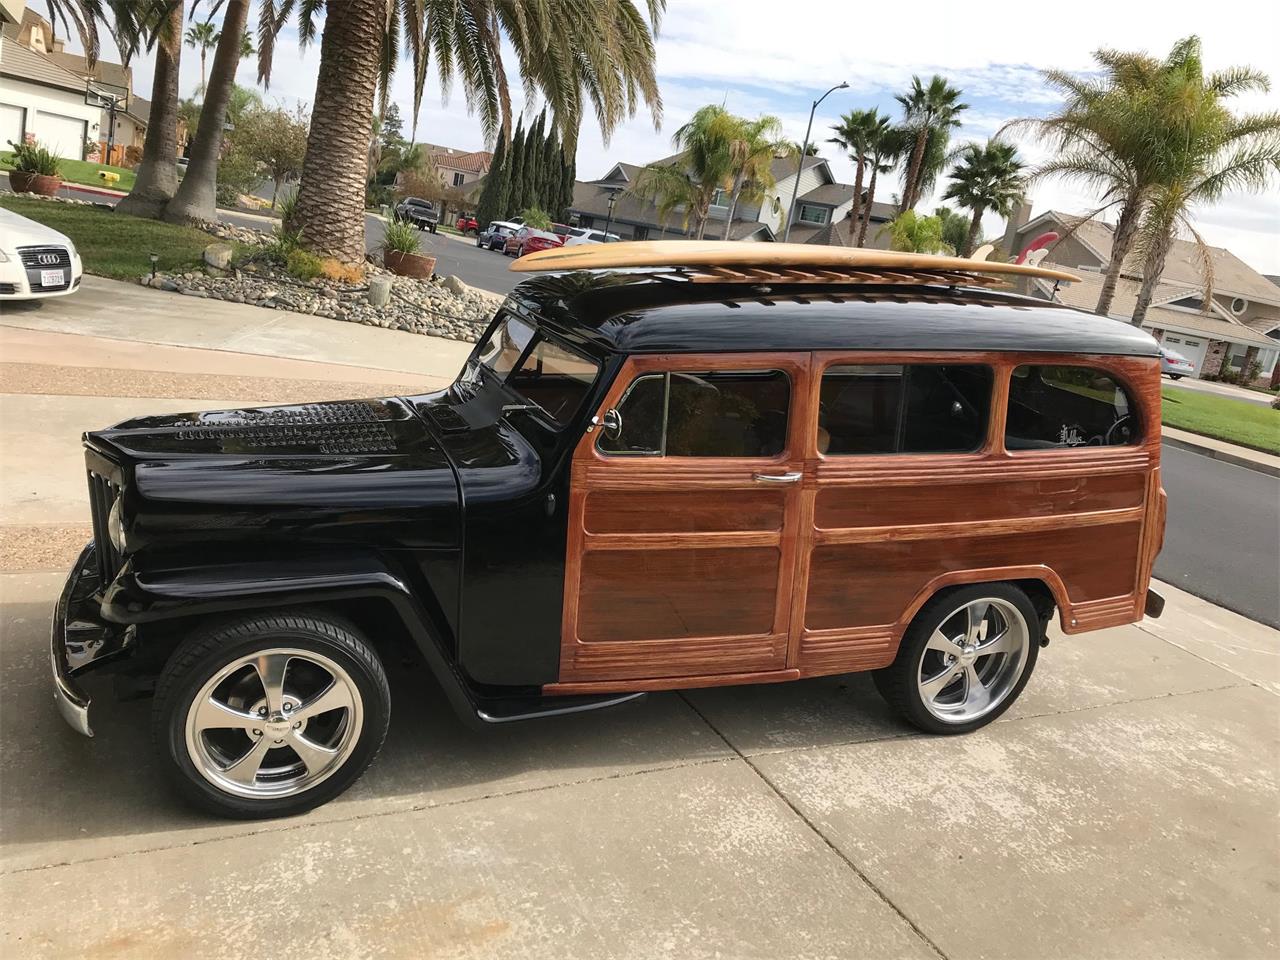 1947 Willys Jeep Wagon in Brentwood, California